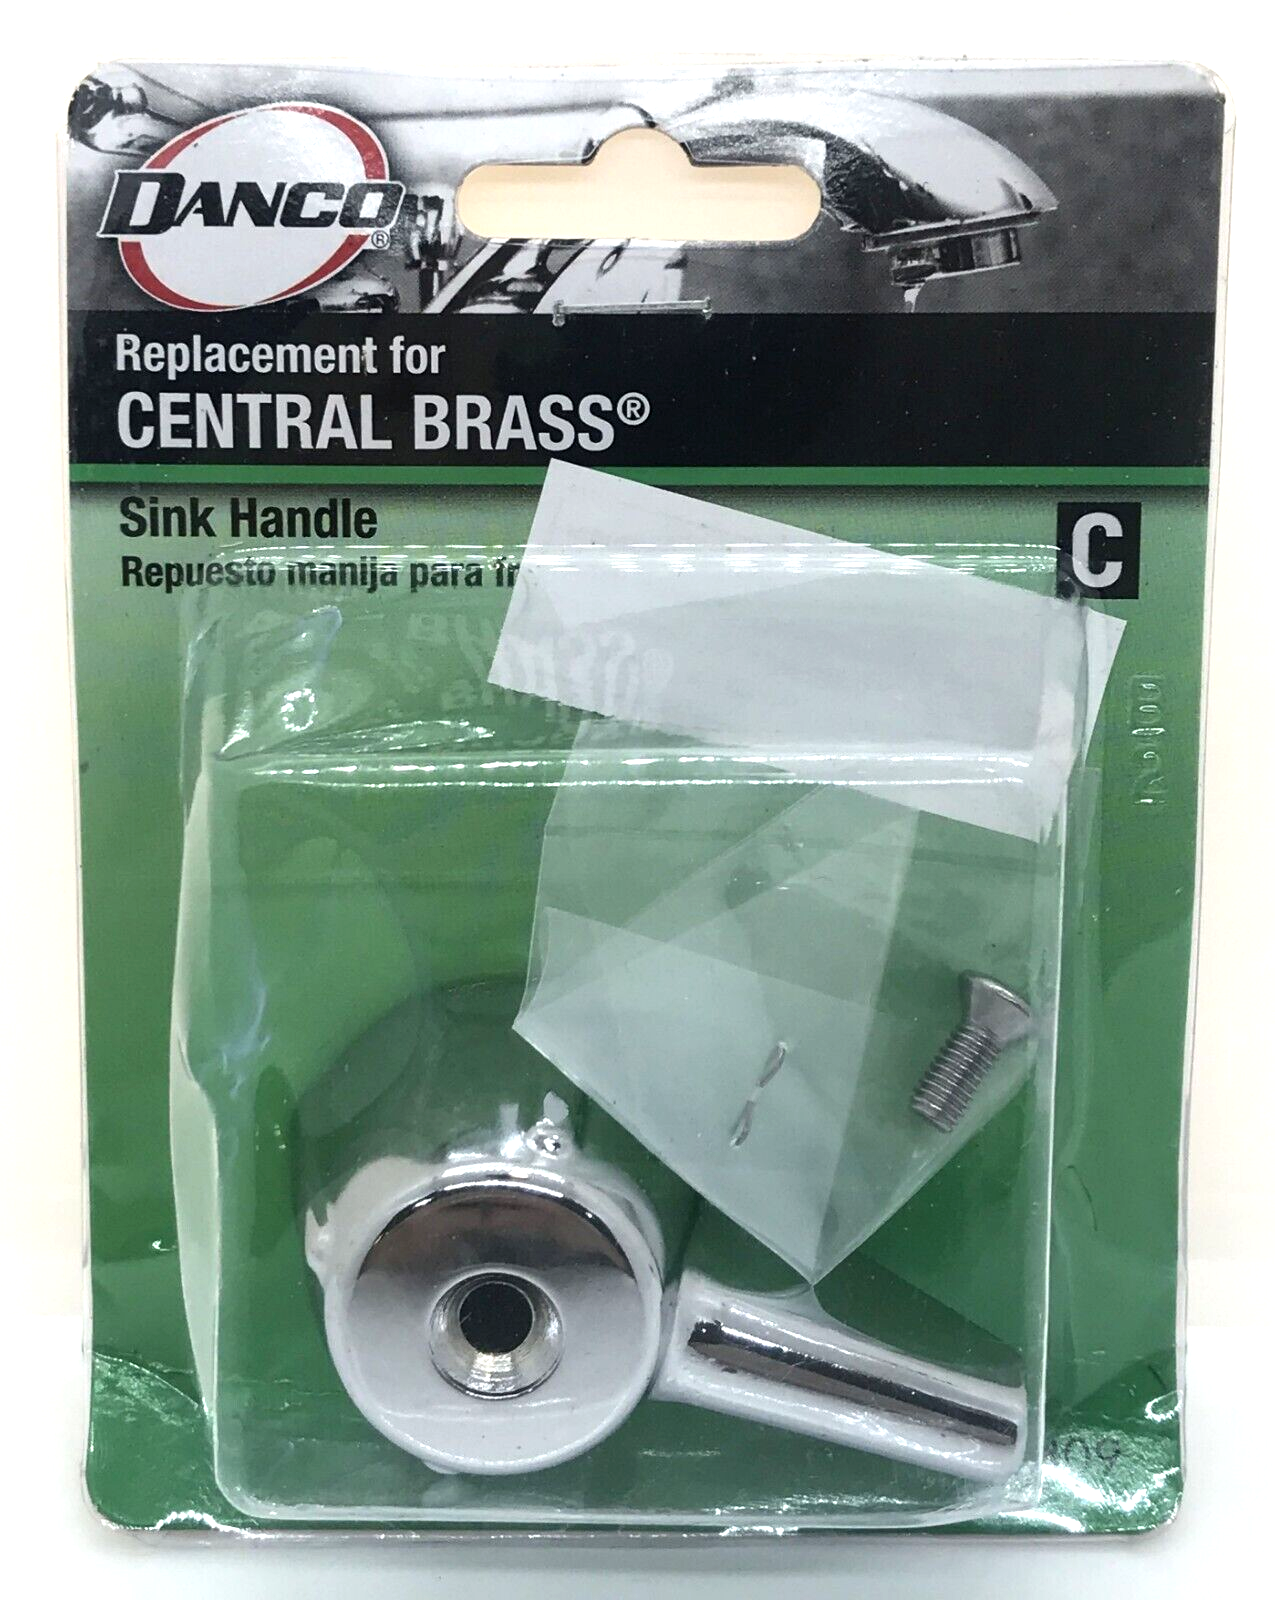 Primary image for Danco Replacement for Central Brass Sink Handle #10809